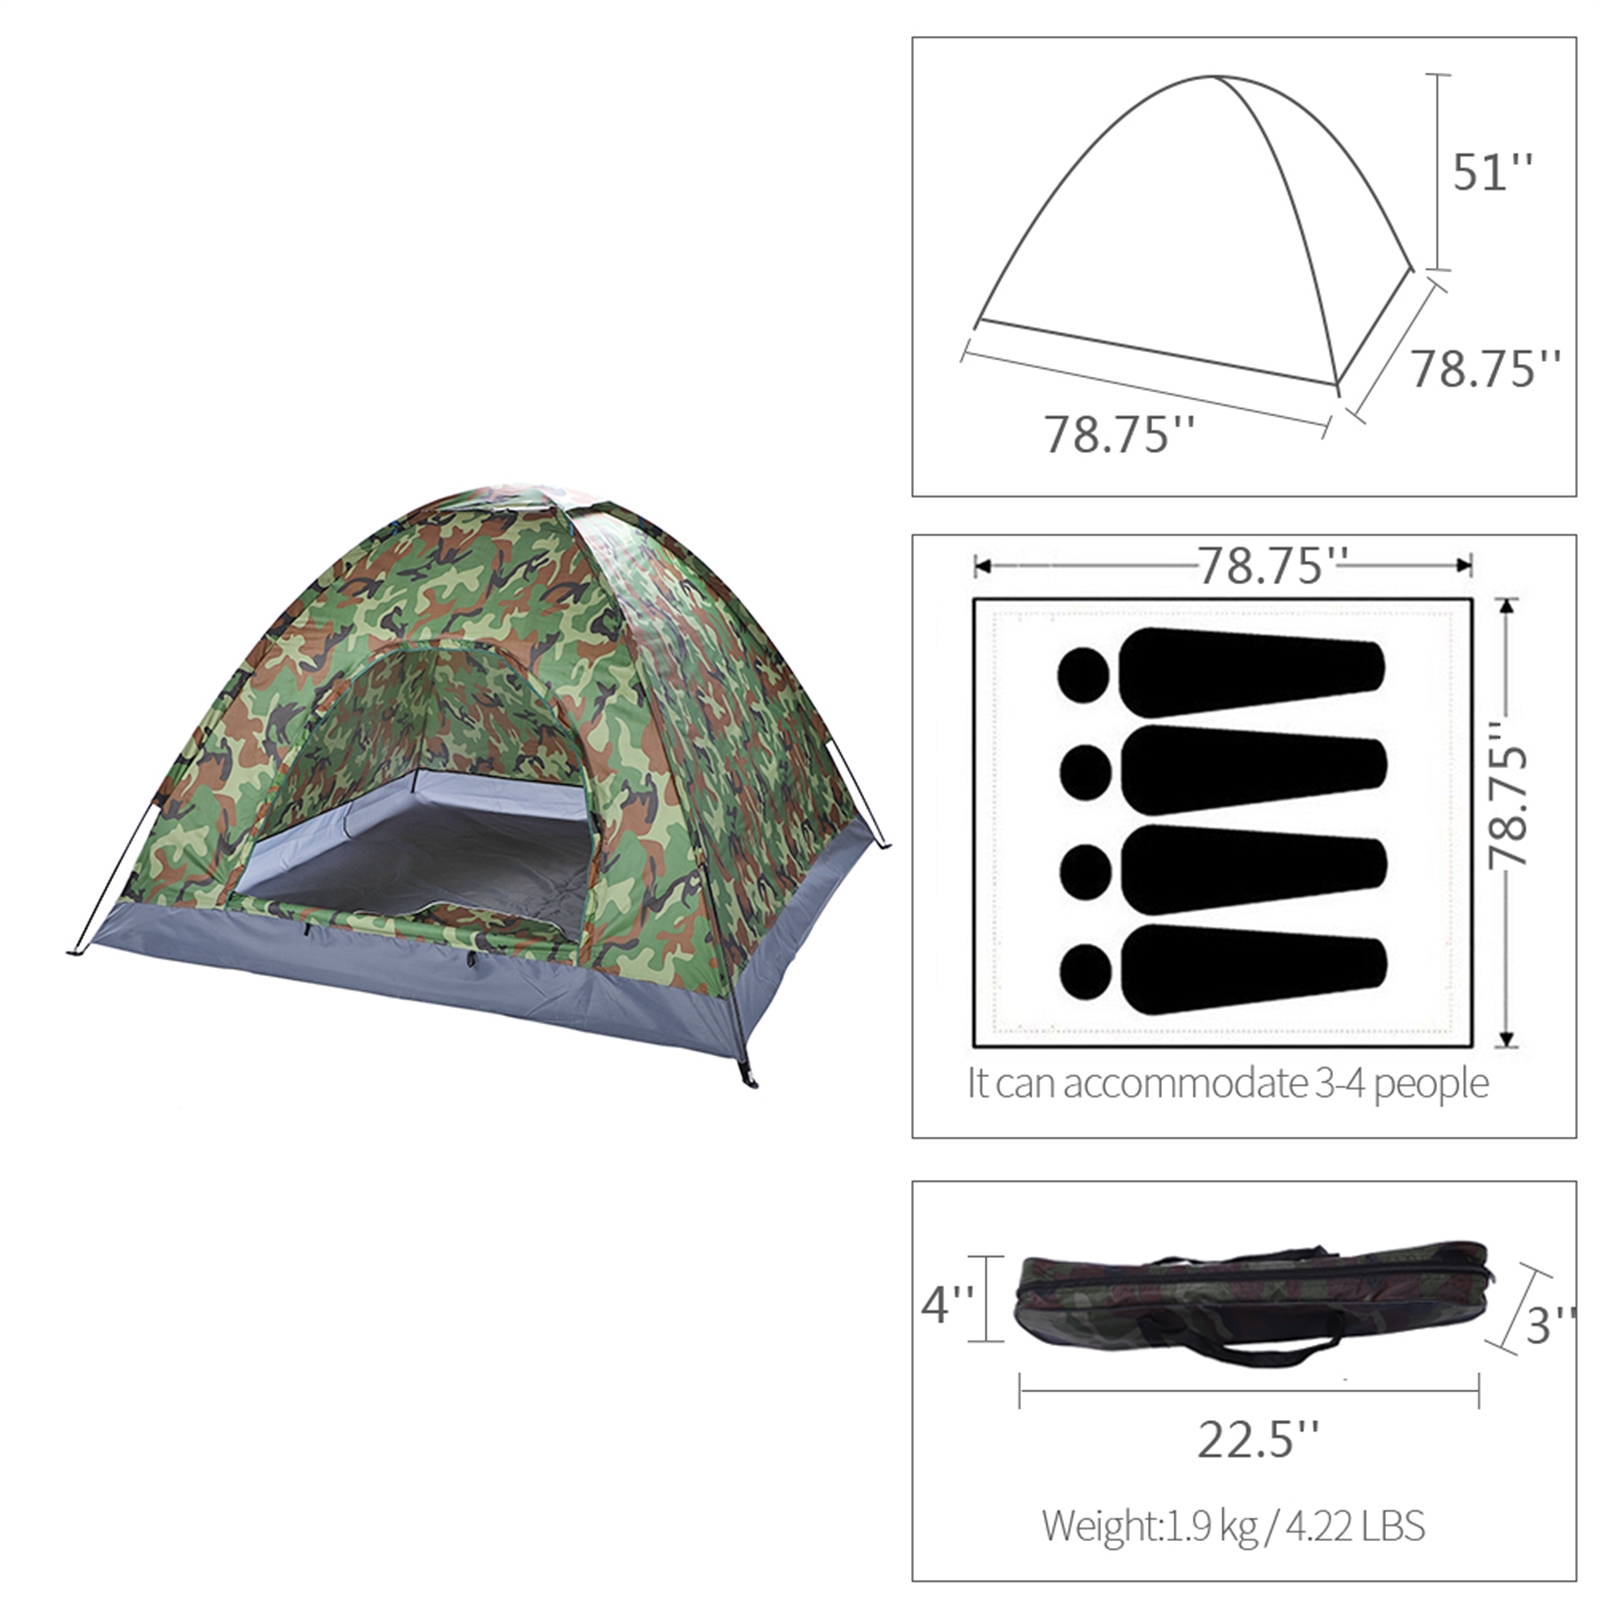 CAMOUFLAGE DOME CAMPING TENT 3 PERSON-4 PERSON